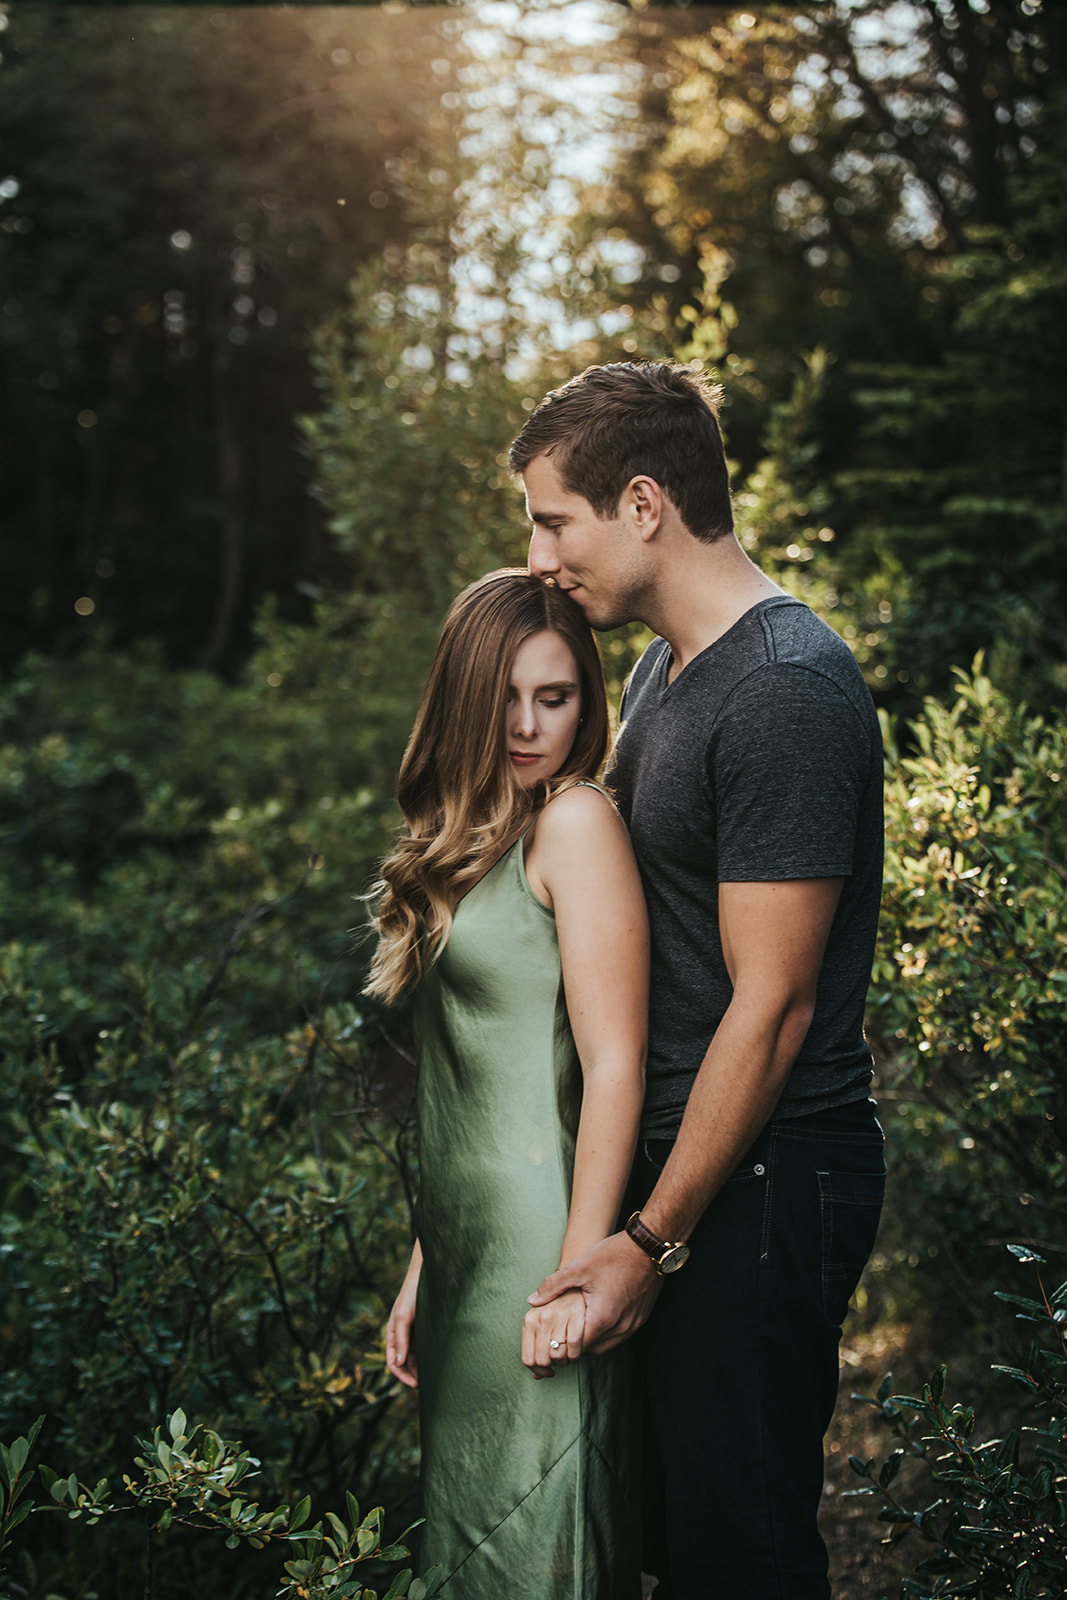 Kananaskis Engagement Session with Sue Moodie Photography